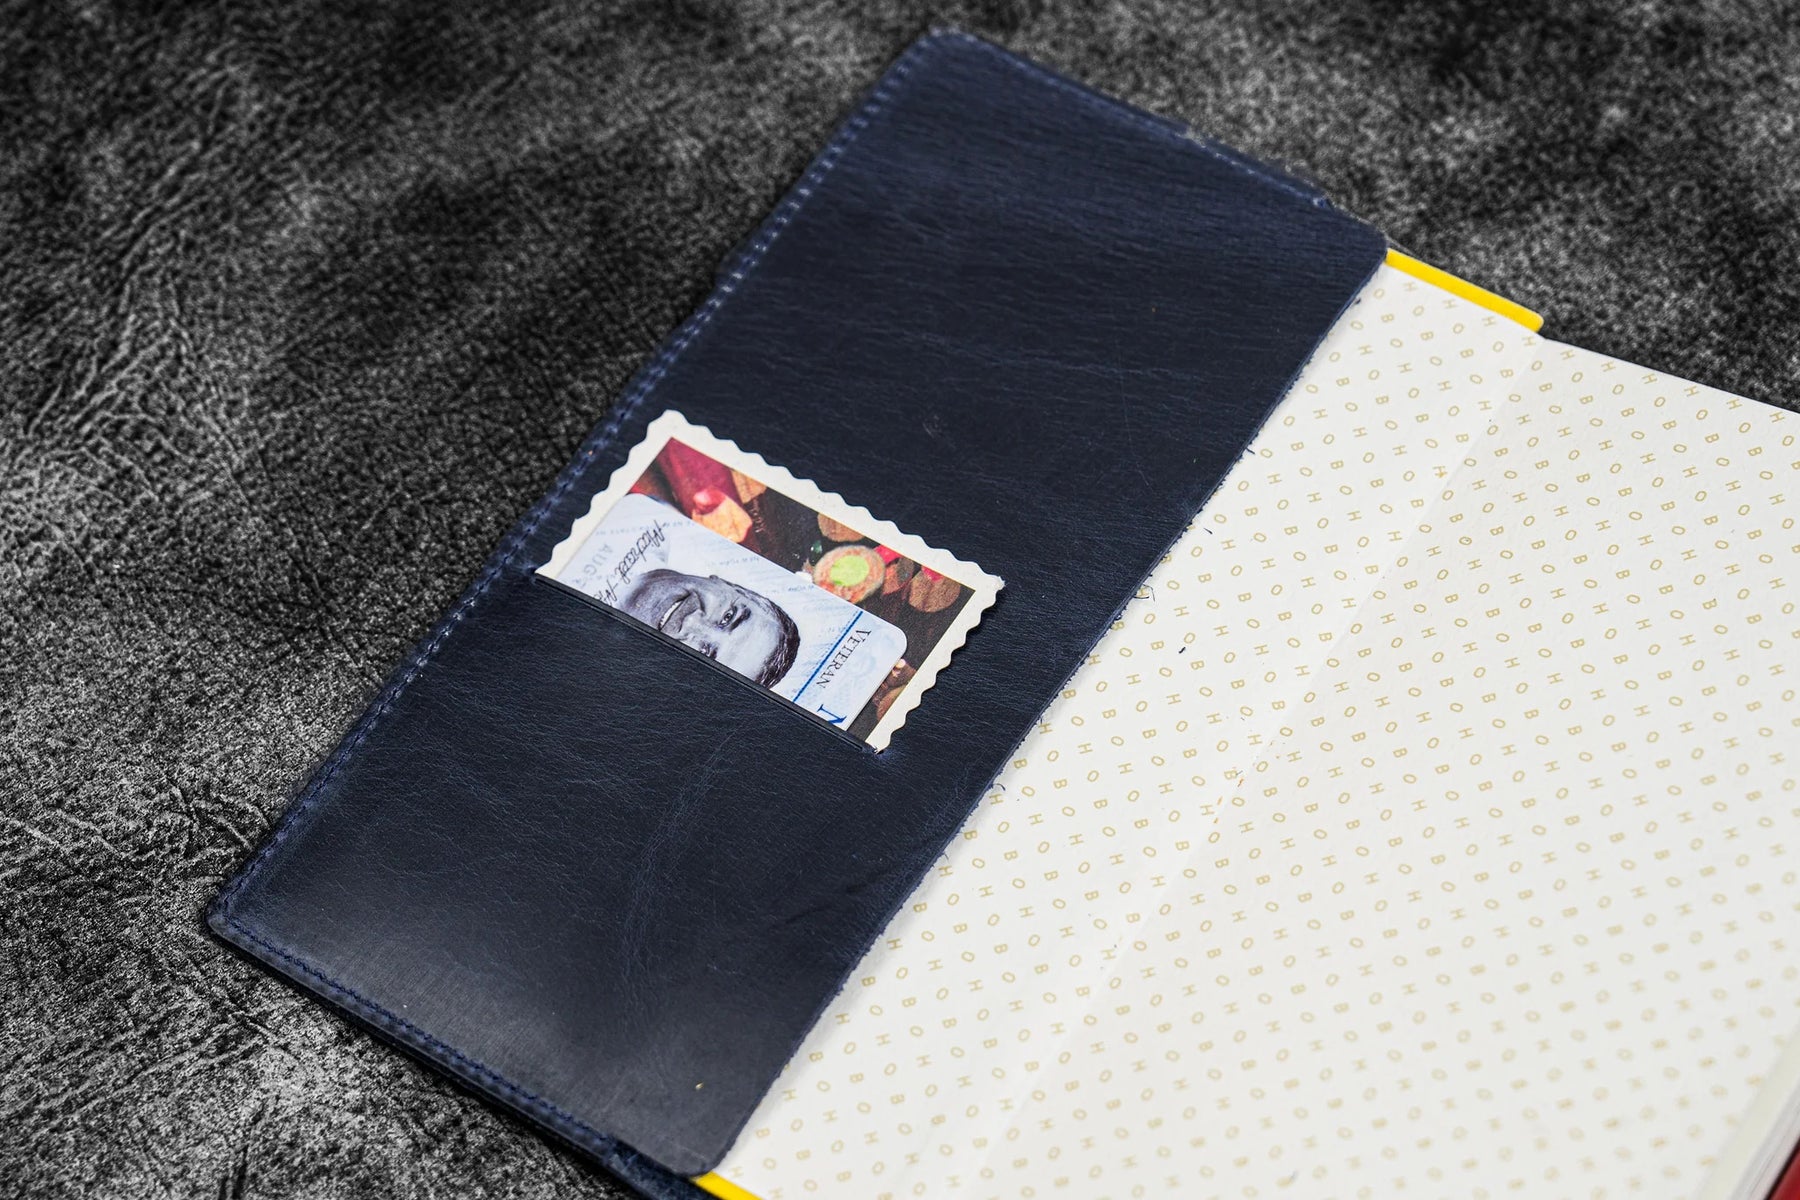 Galen Leather Slim Hobonichi Weeks Planner Cover- Undyed Leather